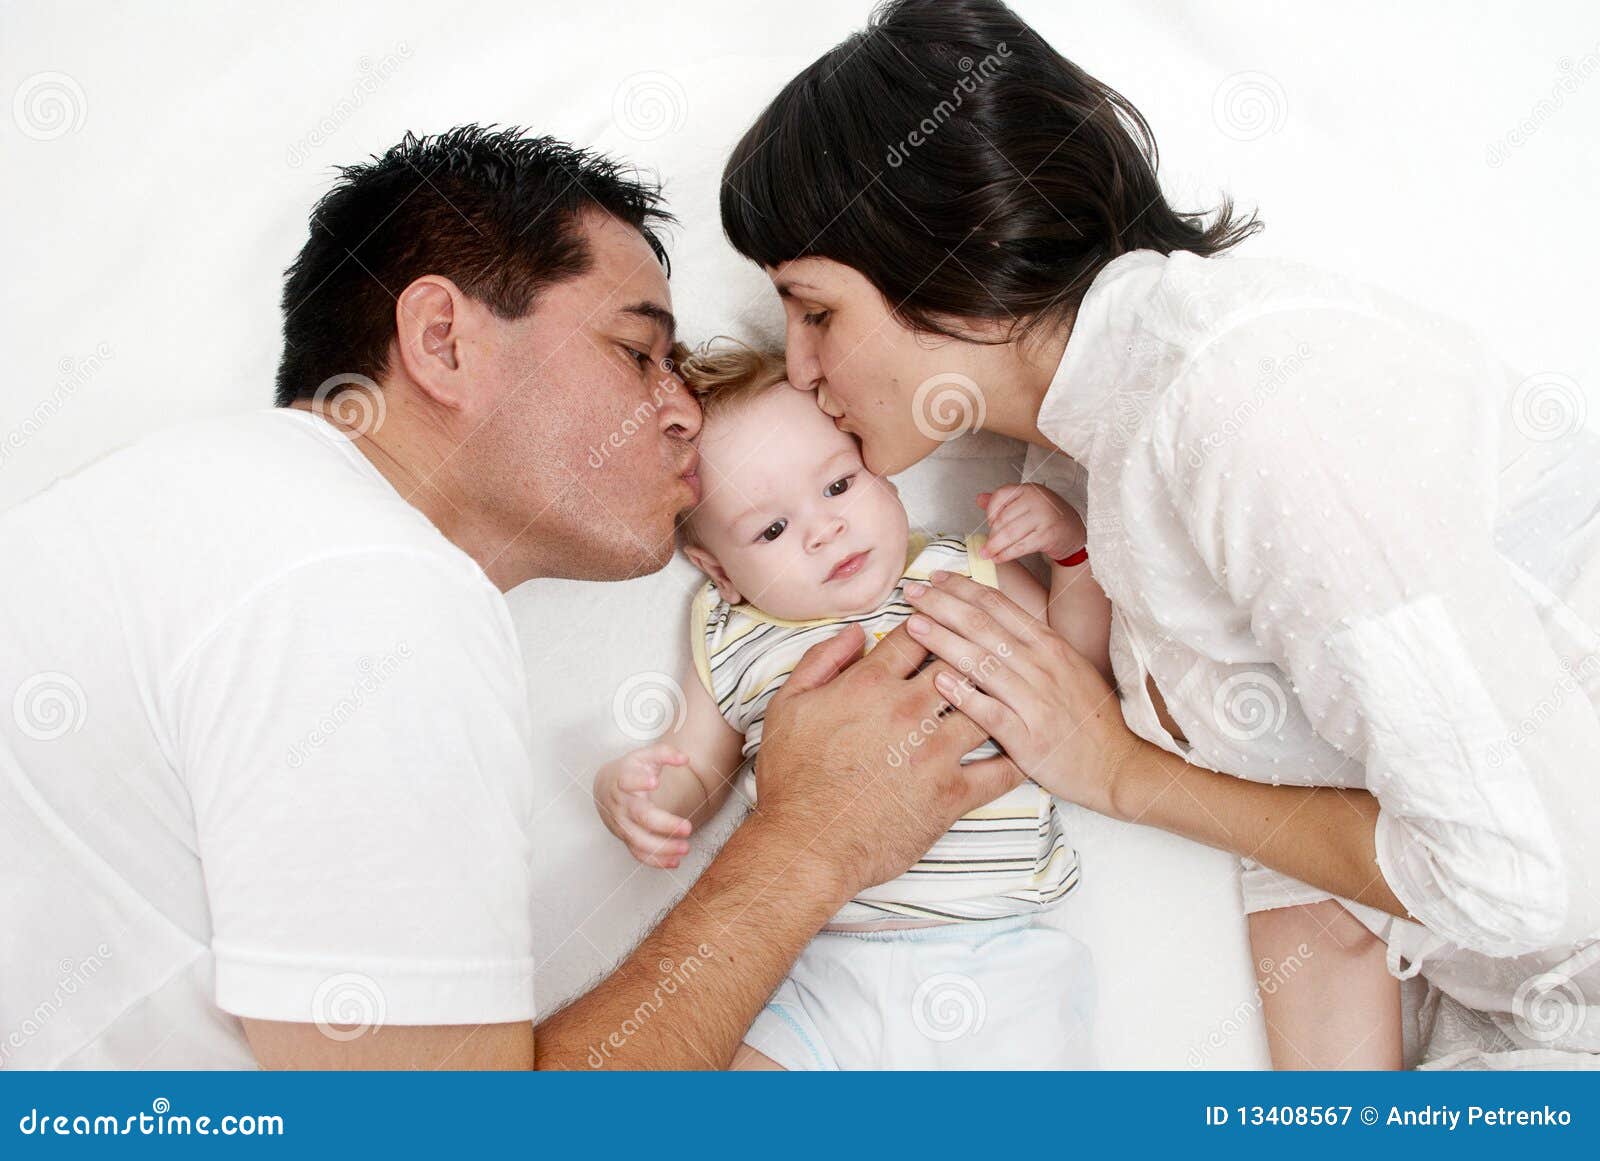 Baby with Parents Lying on a Bed Stock Image - Image of mother ...